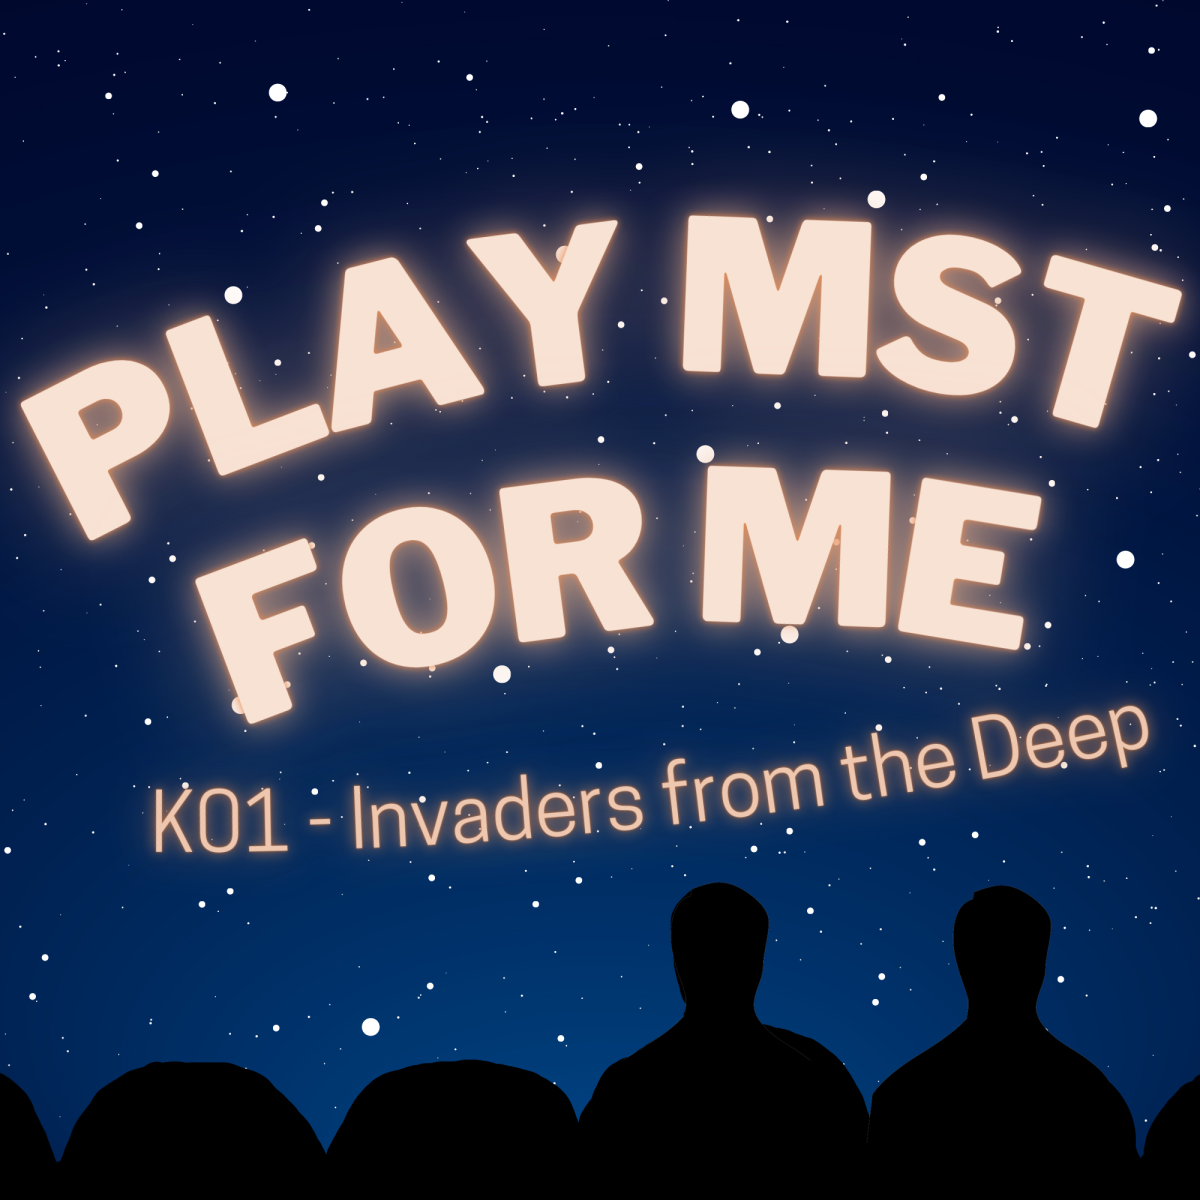 Play MST for Me #2: K01-Invaders from the Deep